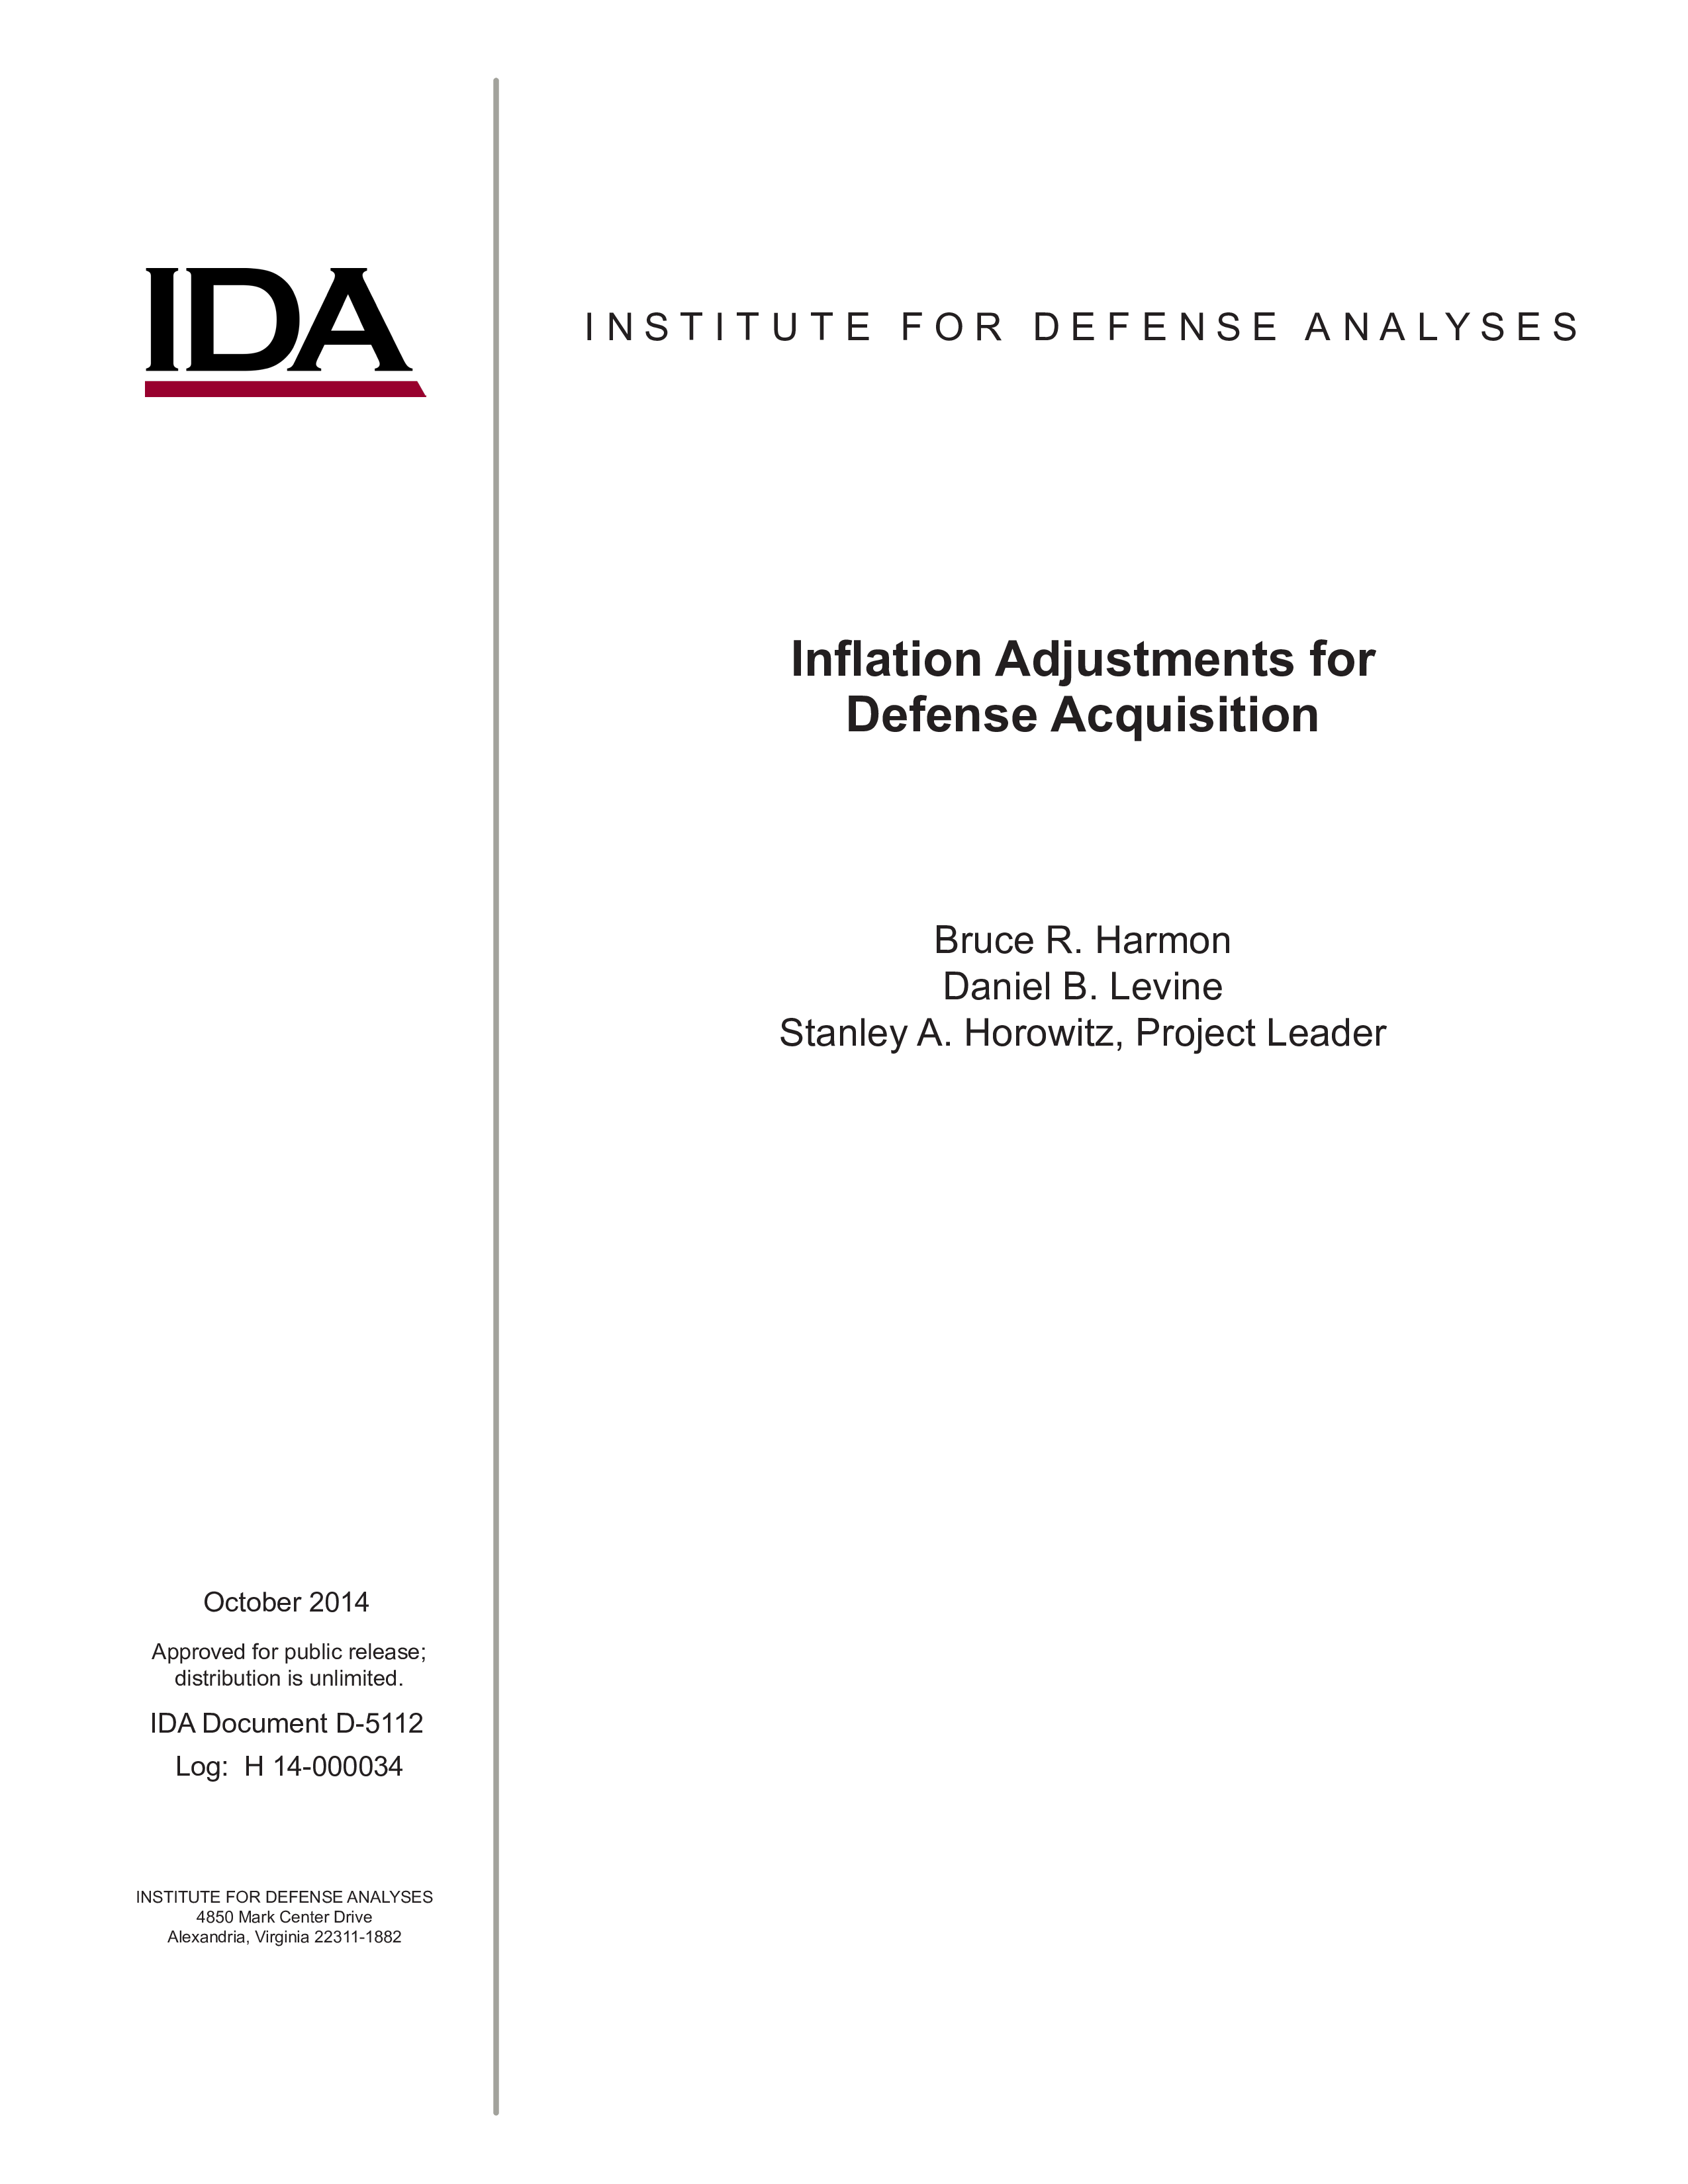 Inflation Adjustments for Defense Acquisition